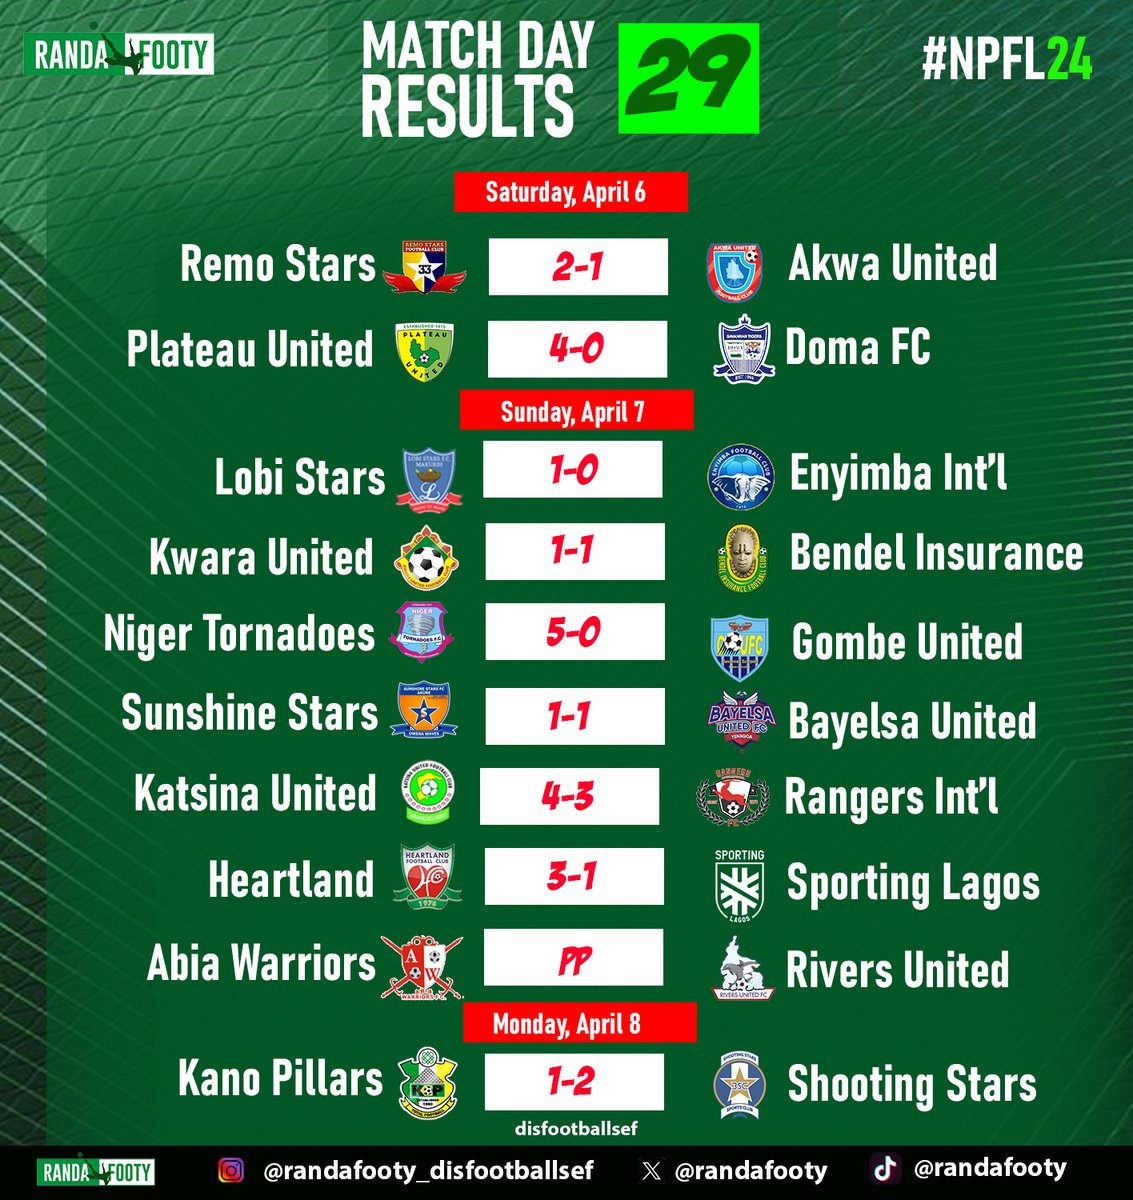 Huge win for Shooting in Kano

@booday10 and @oluwashina will be very happy

All the results from MD29 of the #NPFL24 

#disfootballsef